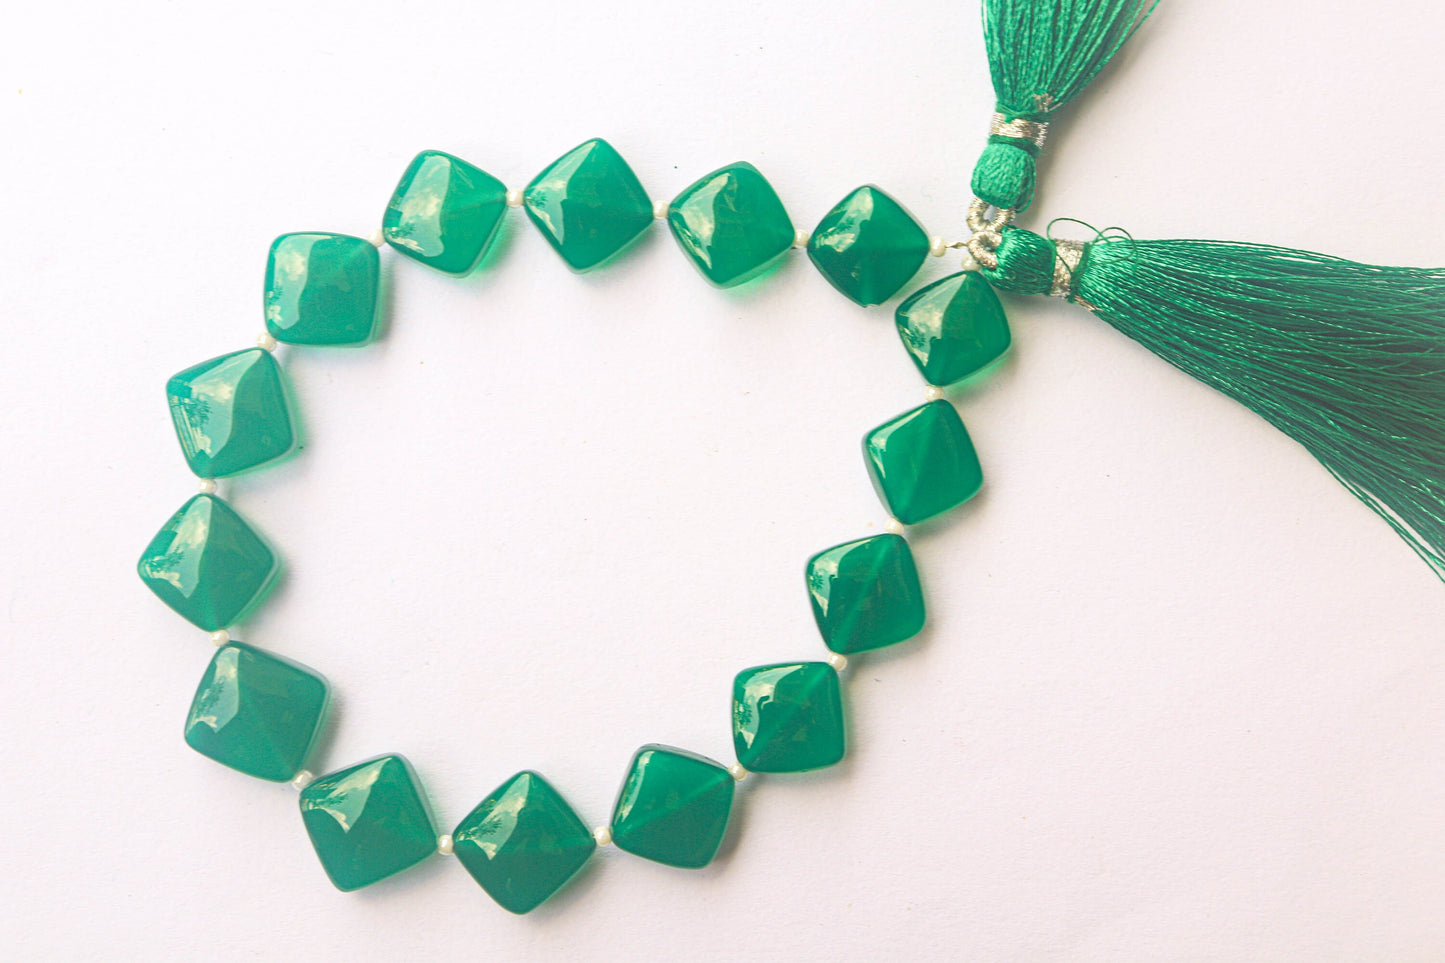 Green Onyx Cushion Shape Beads, 12x12mm to 13x13mm, 15 Pieces, 9 inch String, Gemstone Beads for Jewelry making,